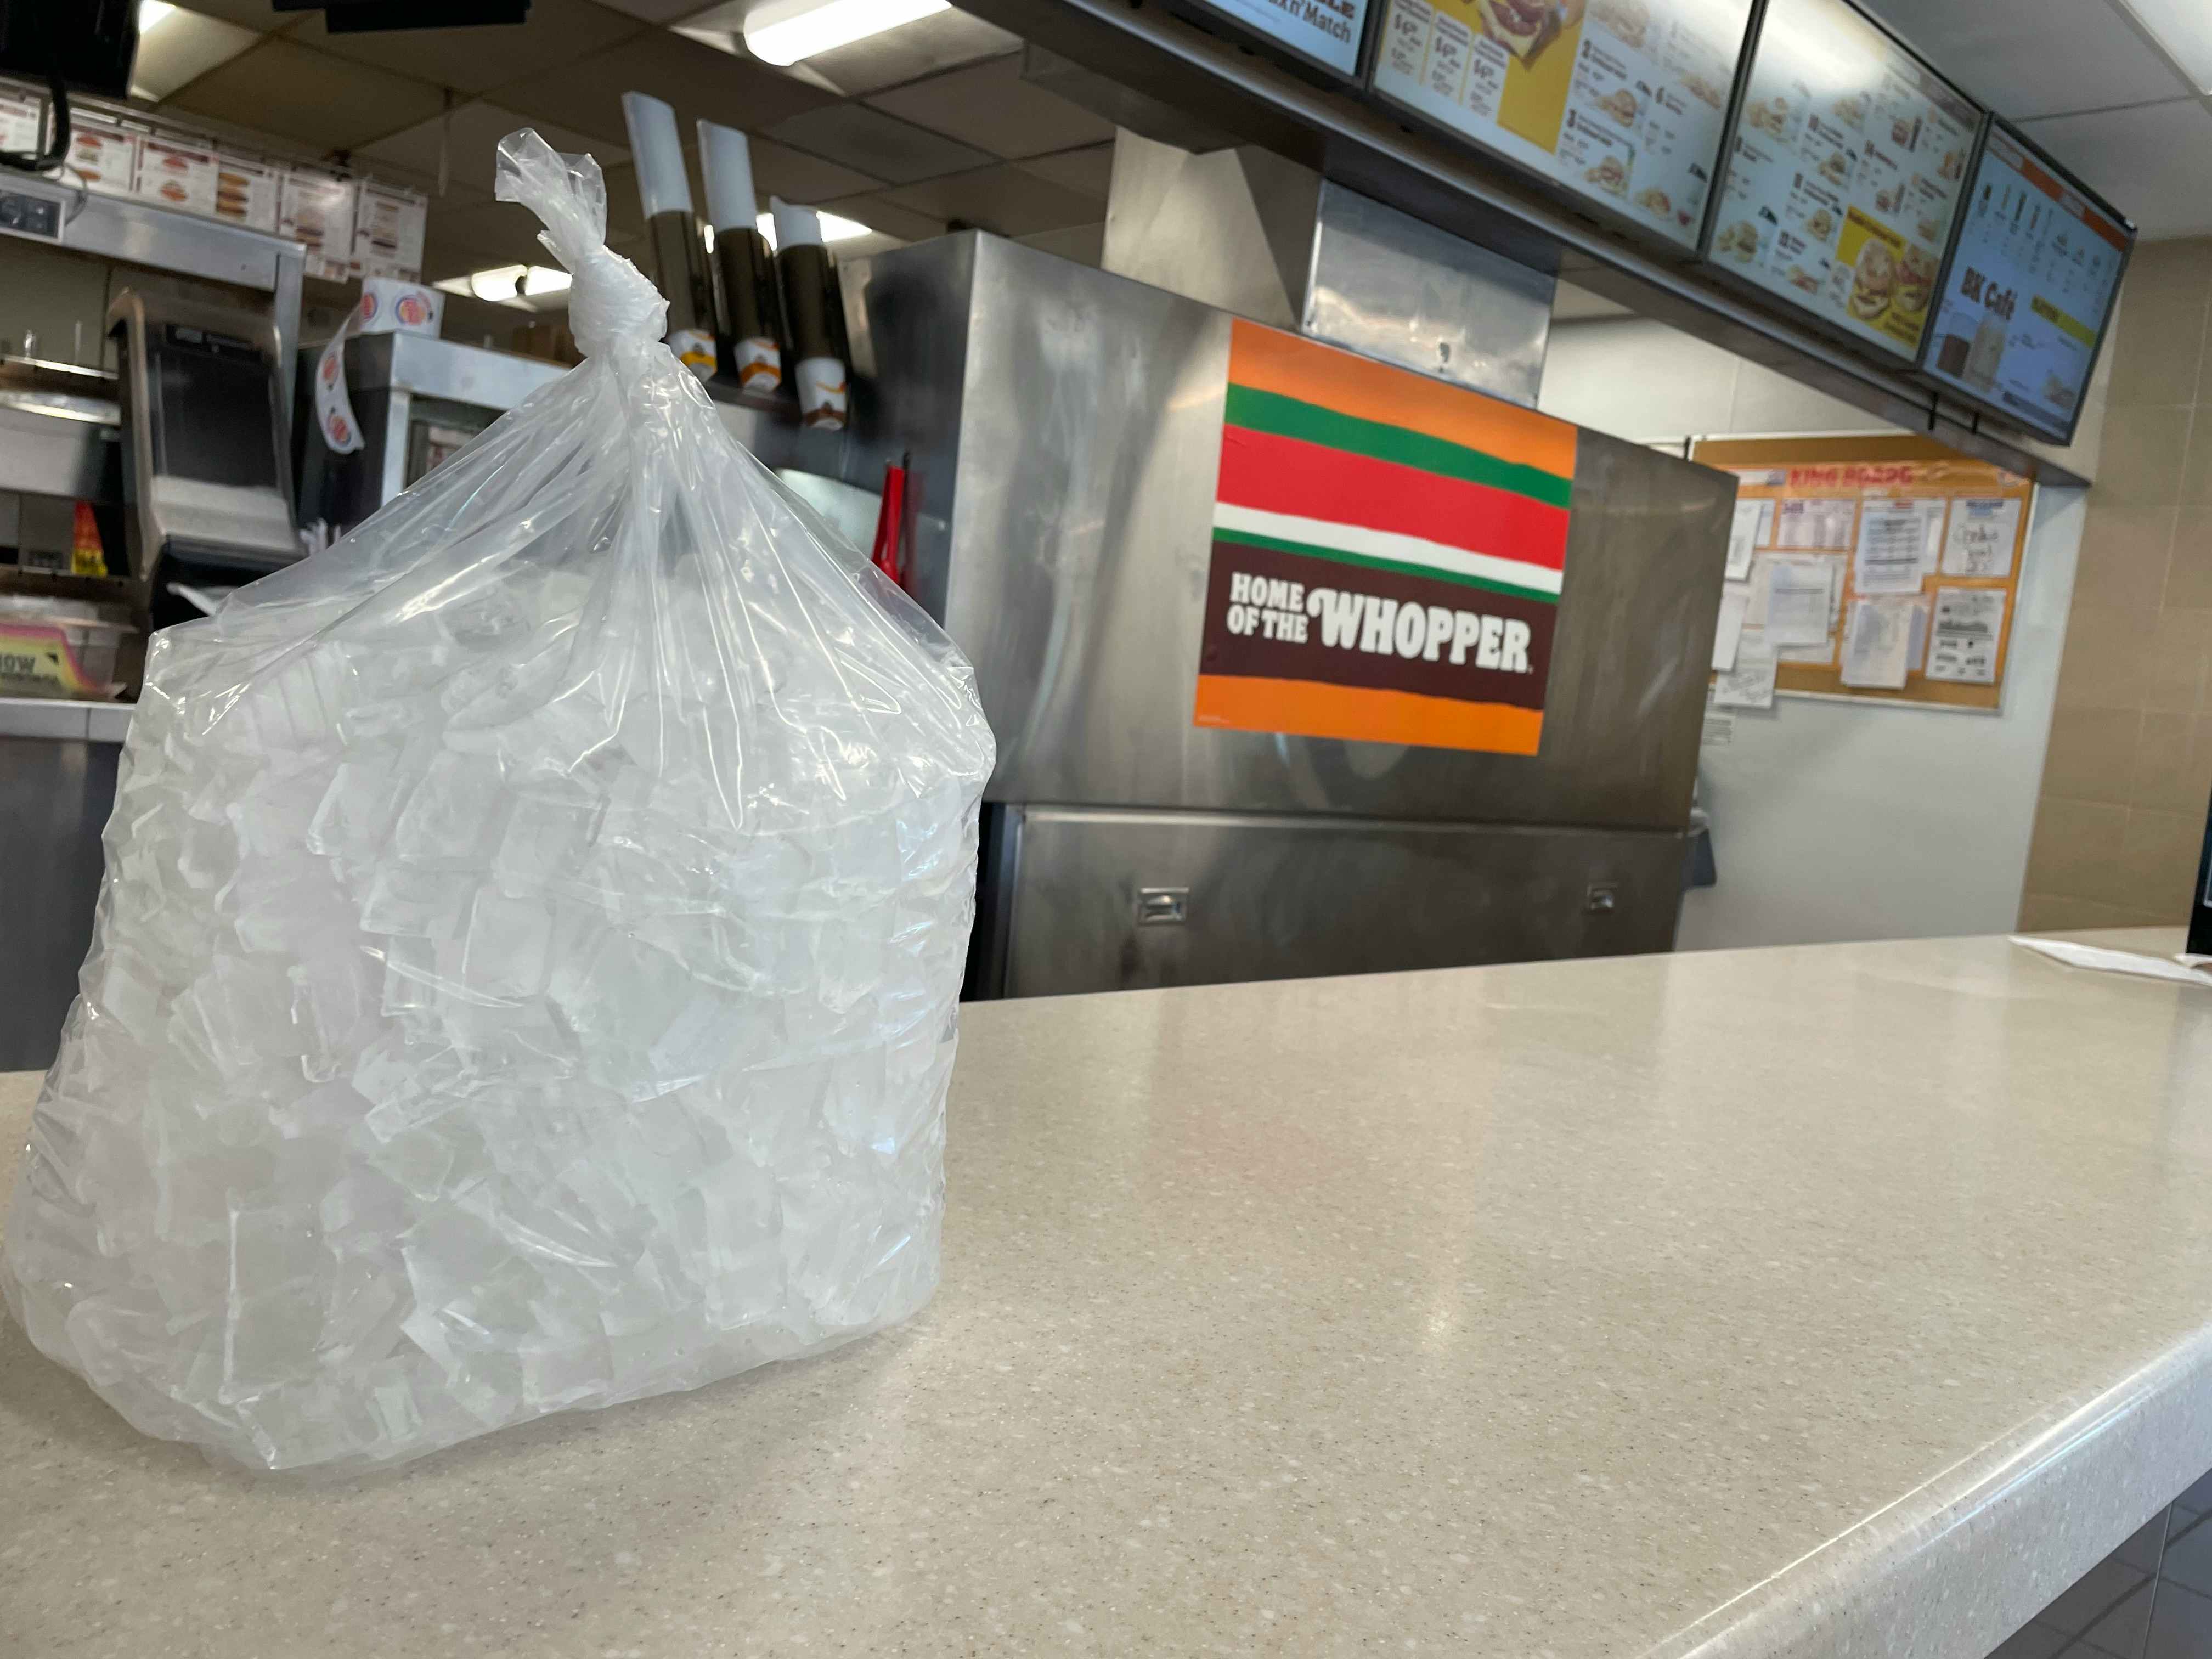 a bag of ice from burger king